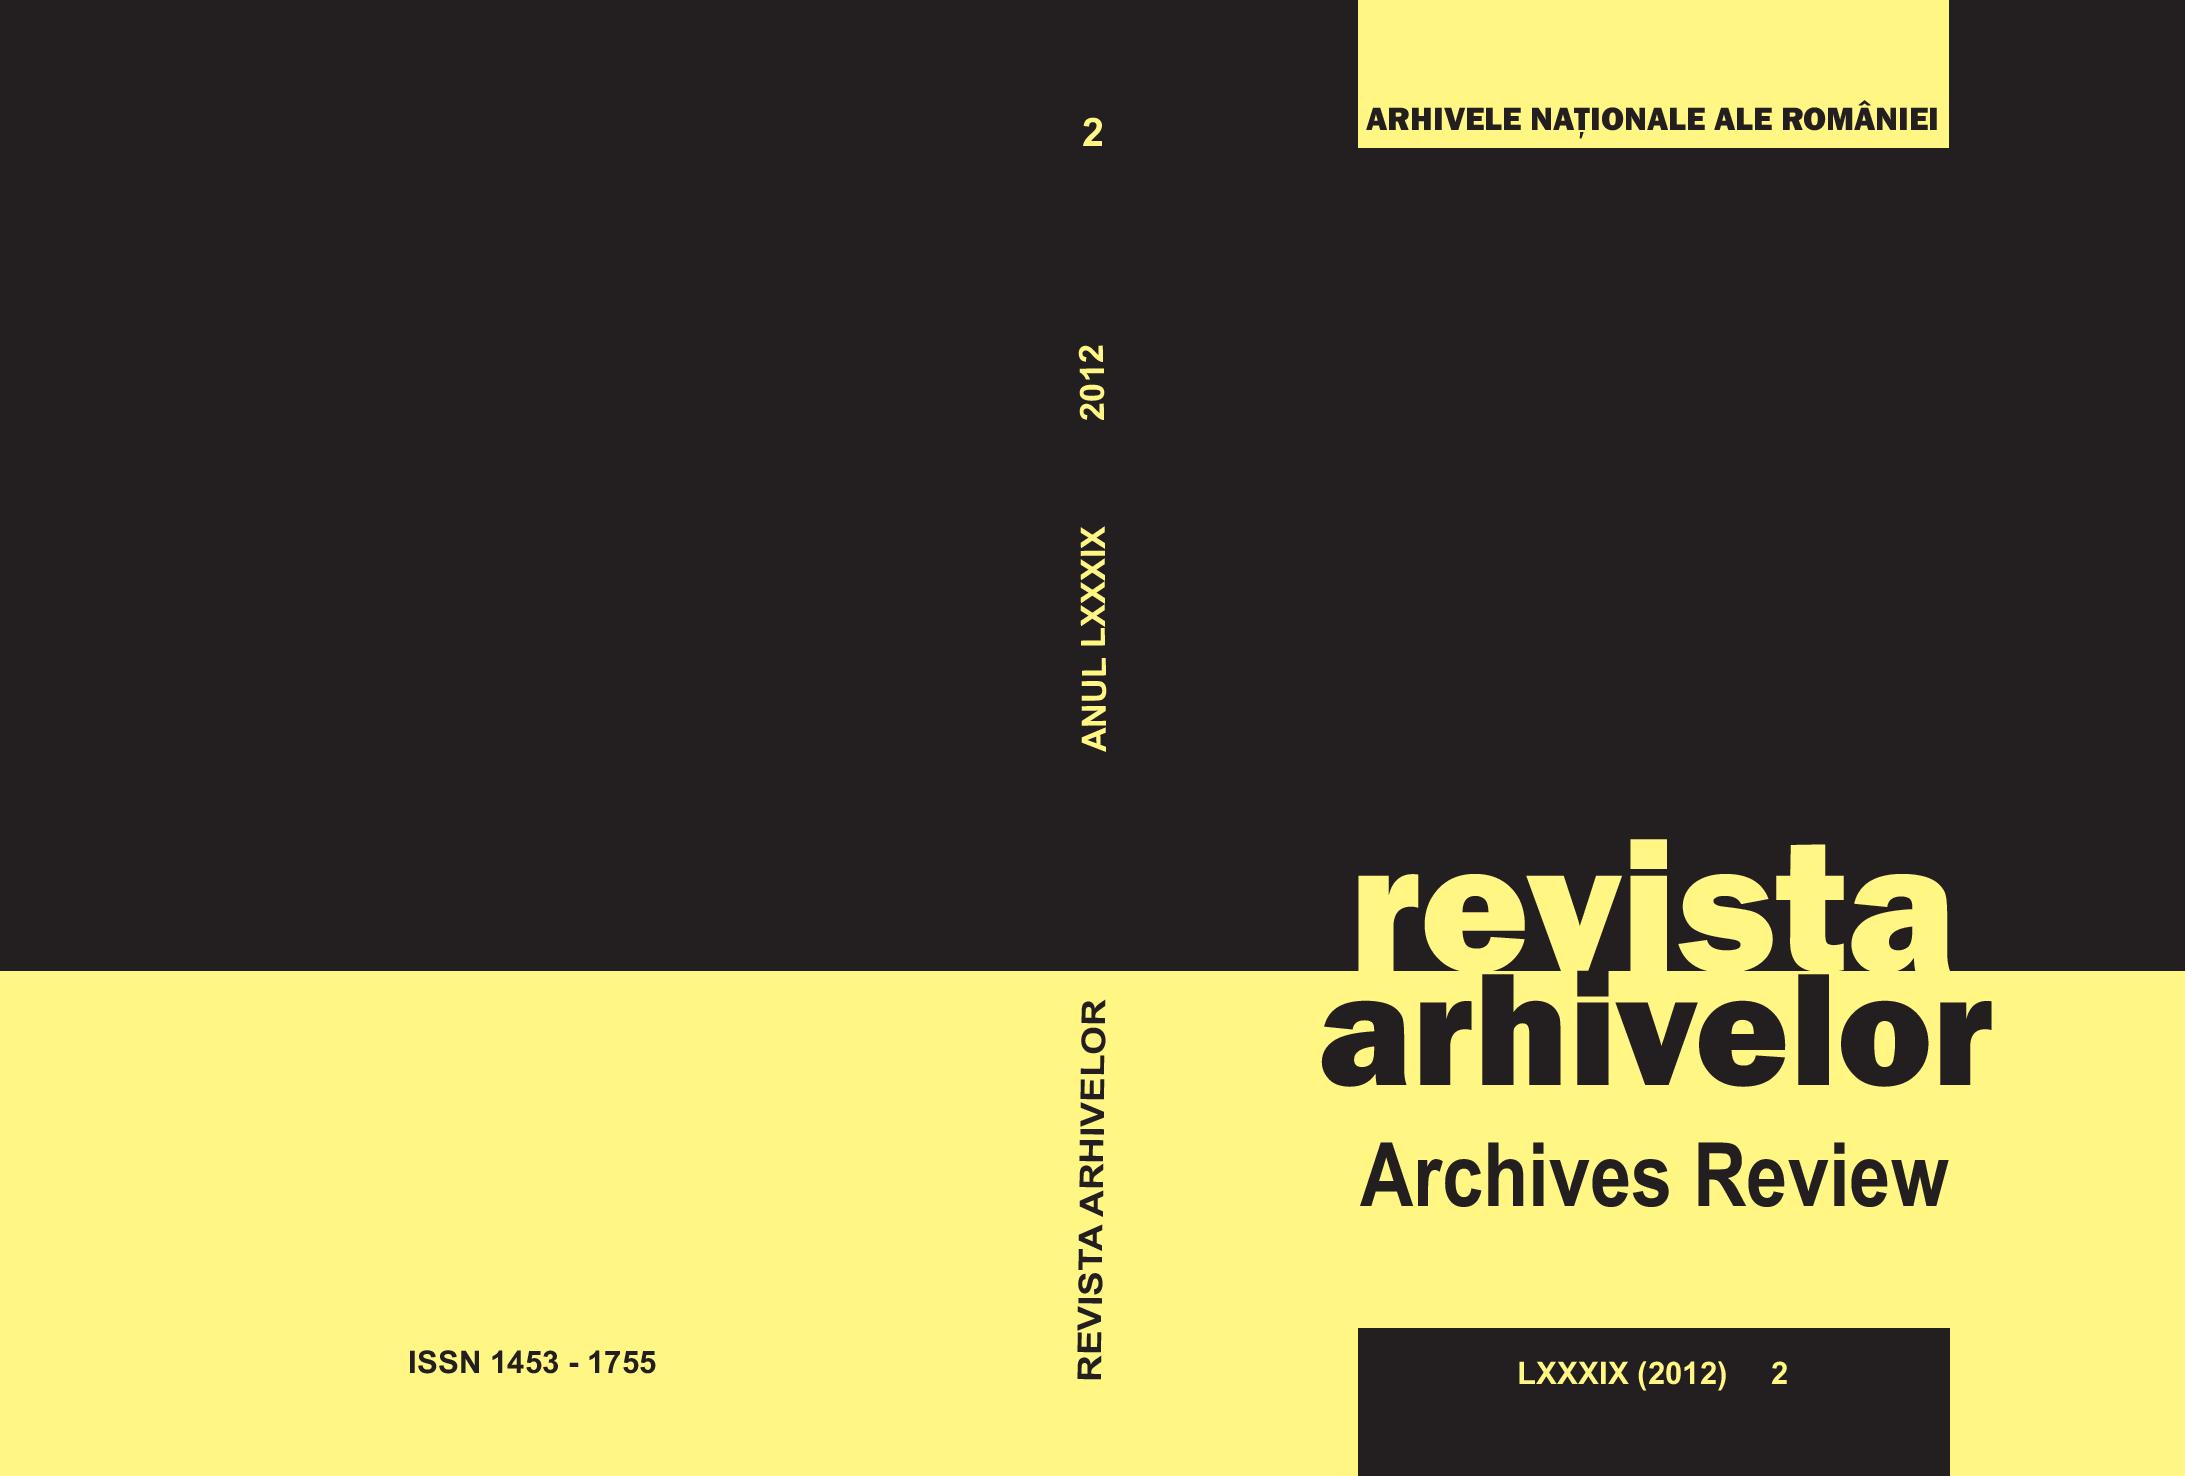 The Romanian Archives of Bucharest as presented in a study published during the years of the Second World War Cover Image